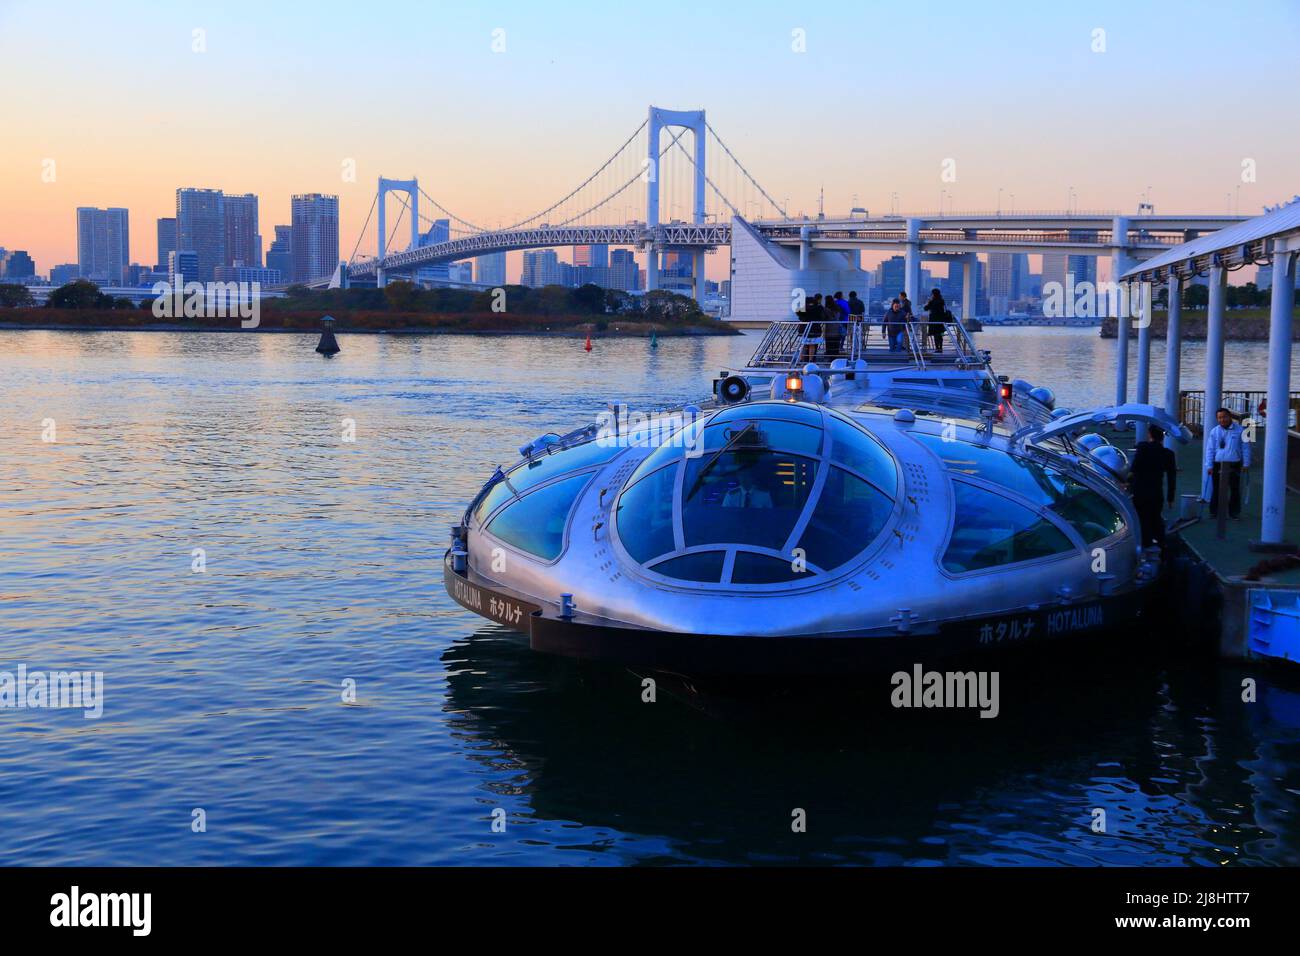 TOKYO, JAPAN - DECEMBER 2, 2016: People ride Hotaluna tour cruise boat in Tokyo, Japan. Tokyo is the capital city of Japan. 37.8 million people live i Stock Photo